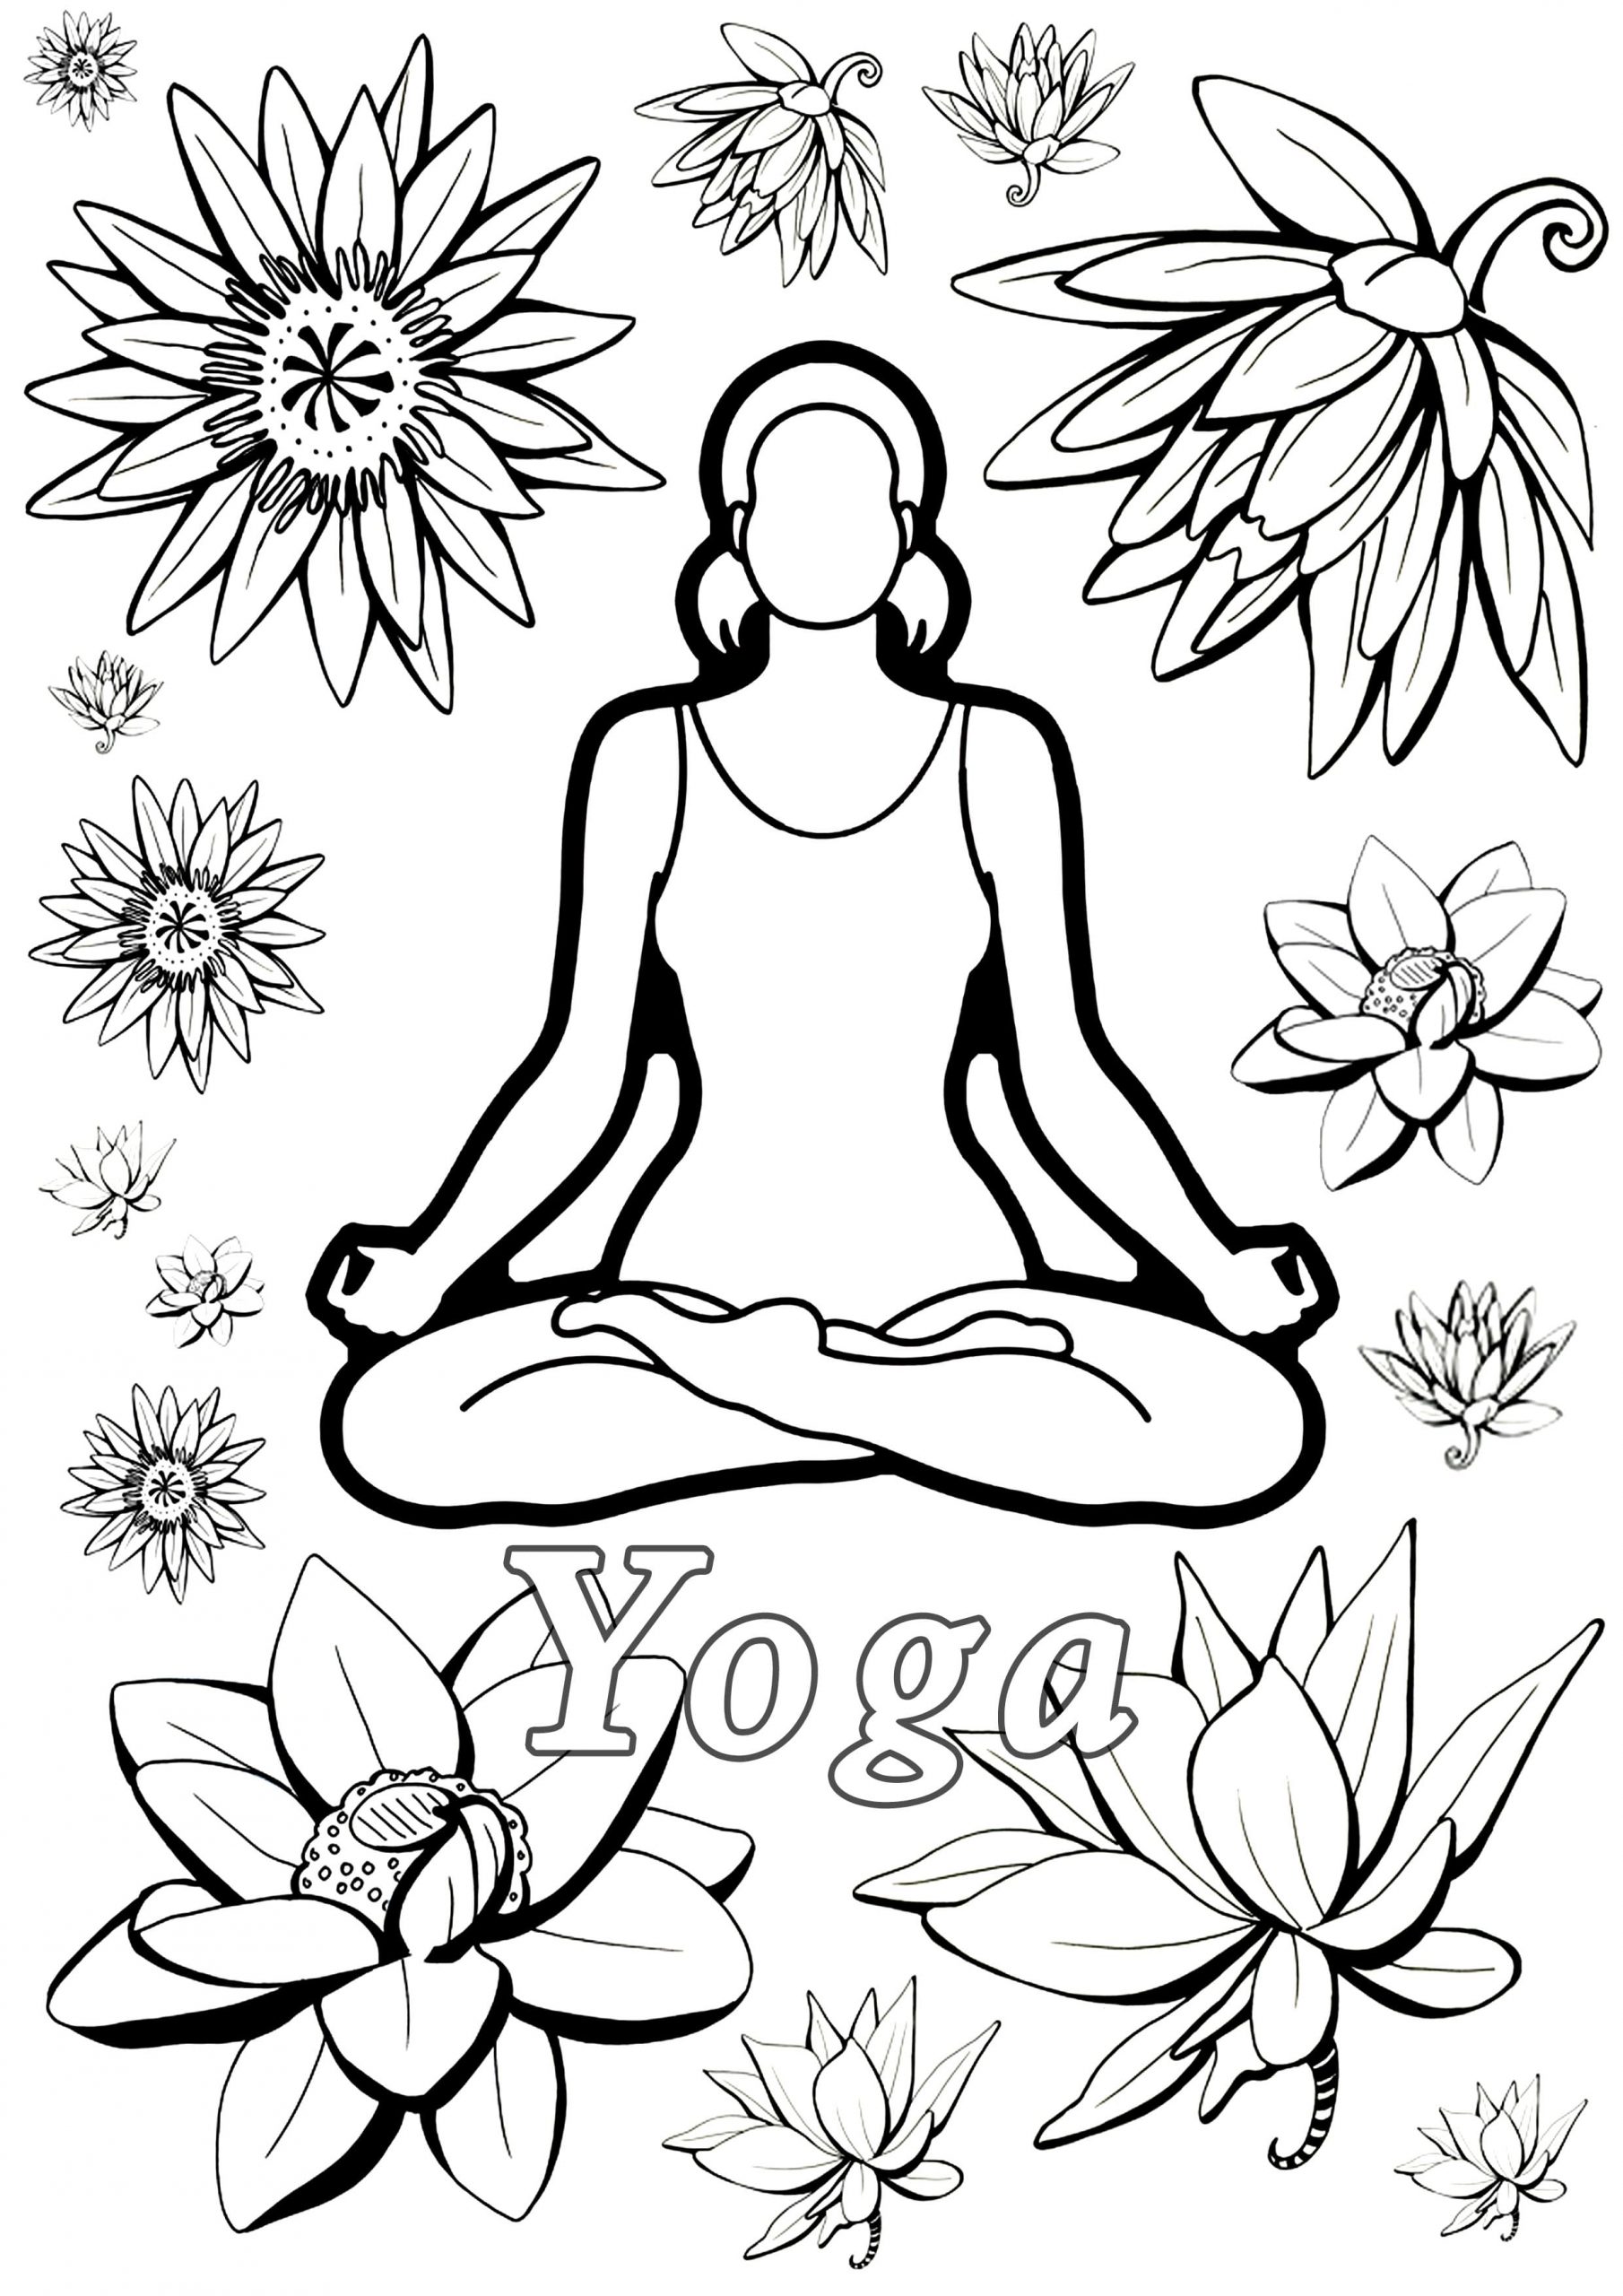 Keep Calm And Do Yoga Coloring Page